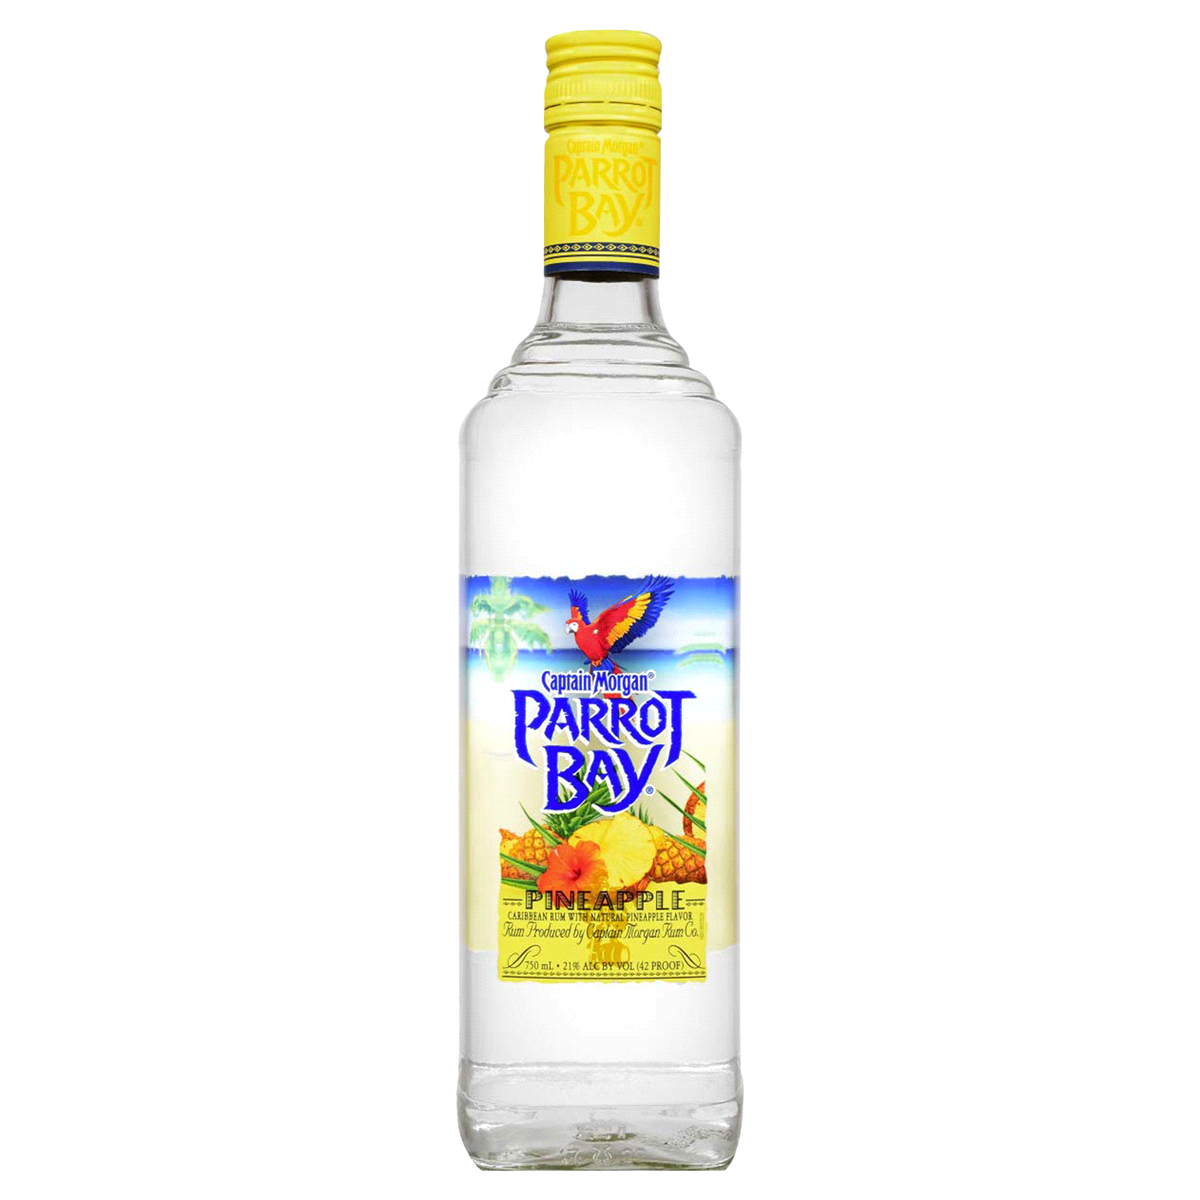 images/wine/SPIRITAS and OTHERS/Captain Morgan Parrot Bay Pineapple.png